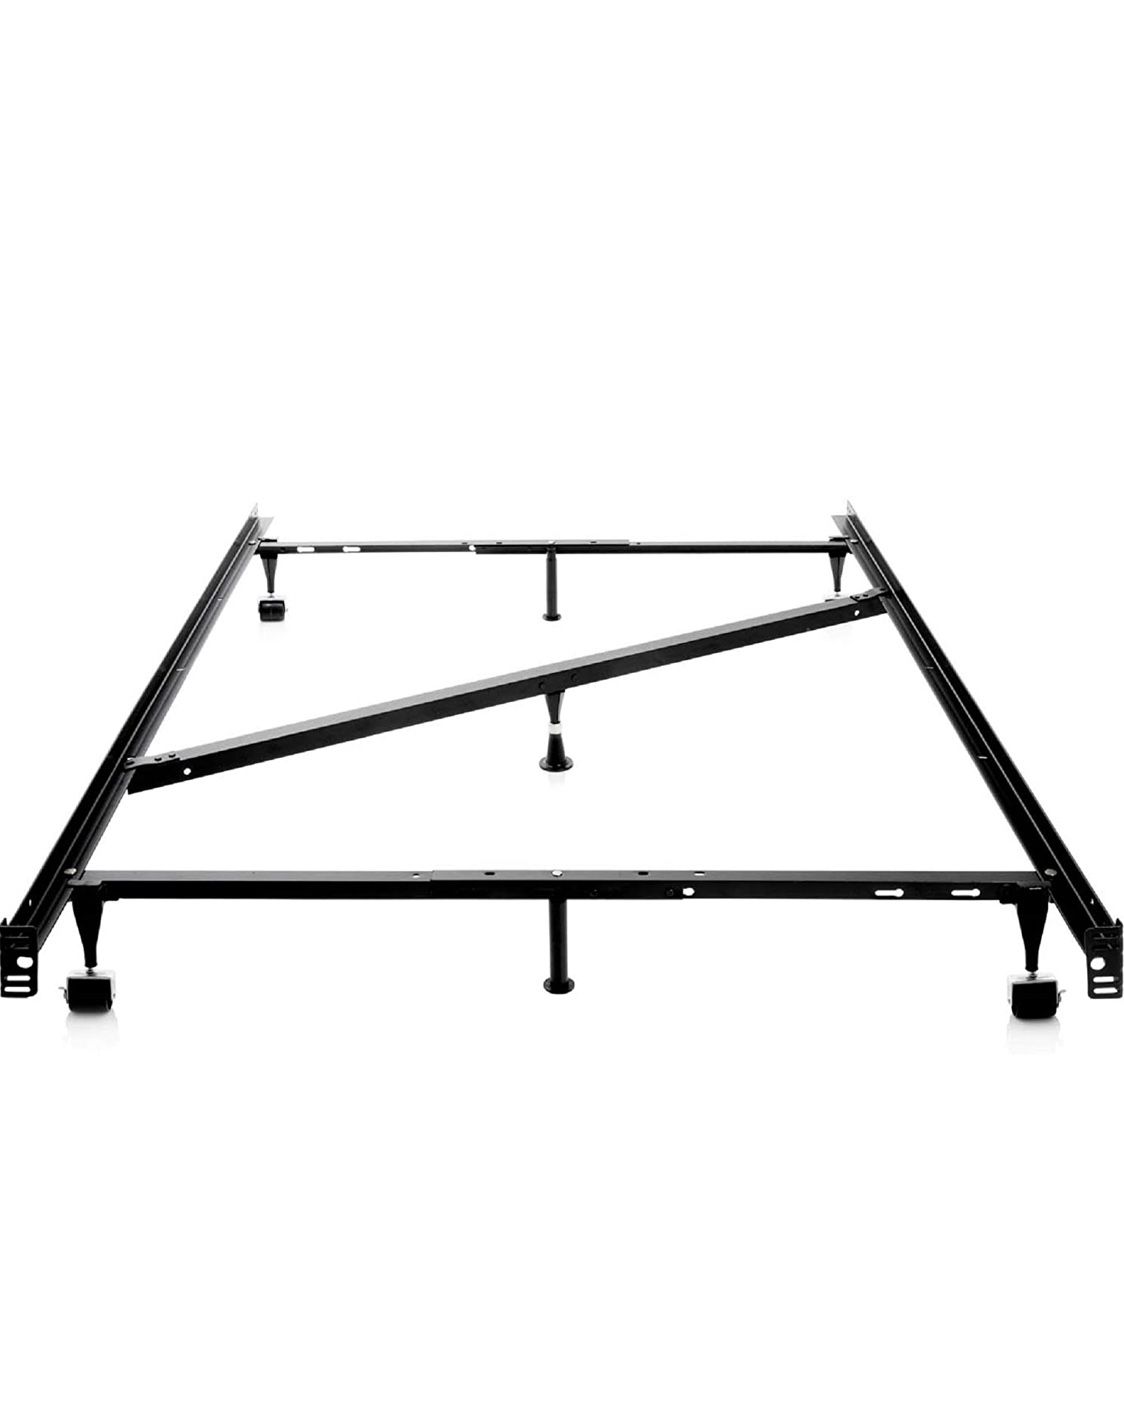 New in box, MALOUF Structures Heavy Duty Adjustable Metal Center Support and Rug Rollers bed frame, Queen, Full XL, Full, Twin XL, Twin! Awesome Deal